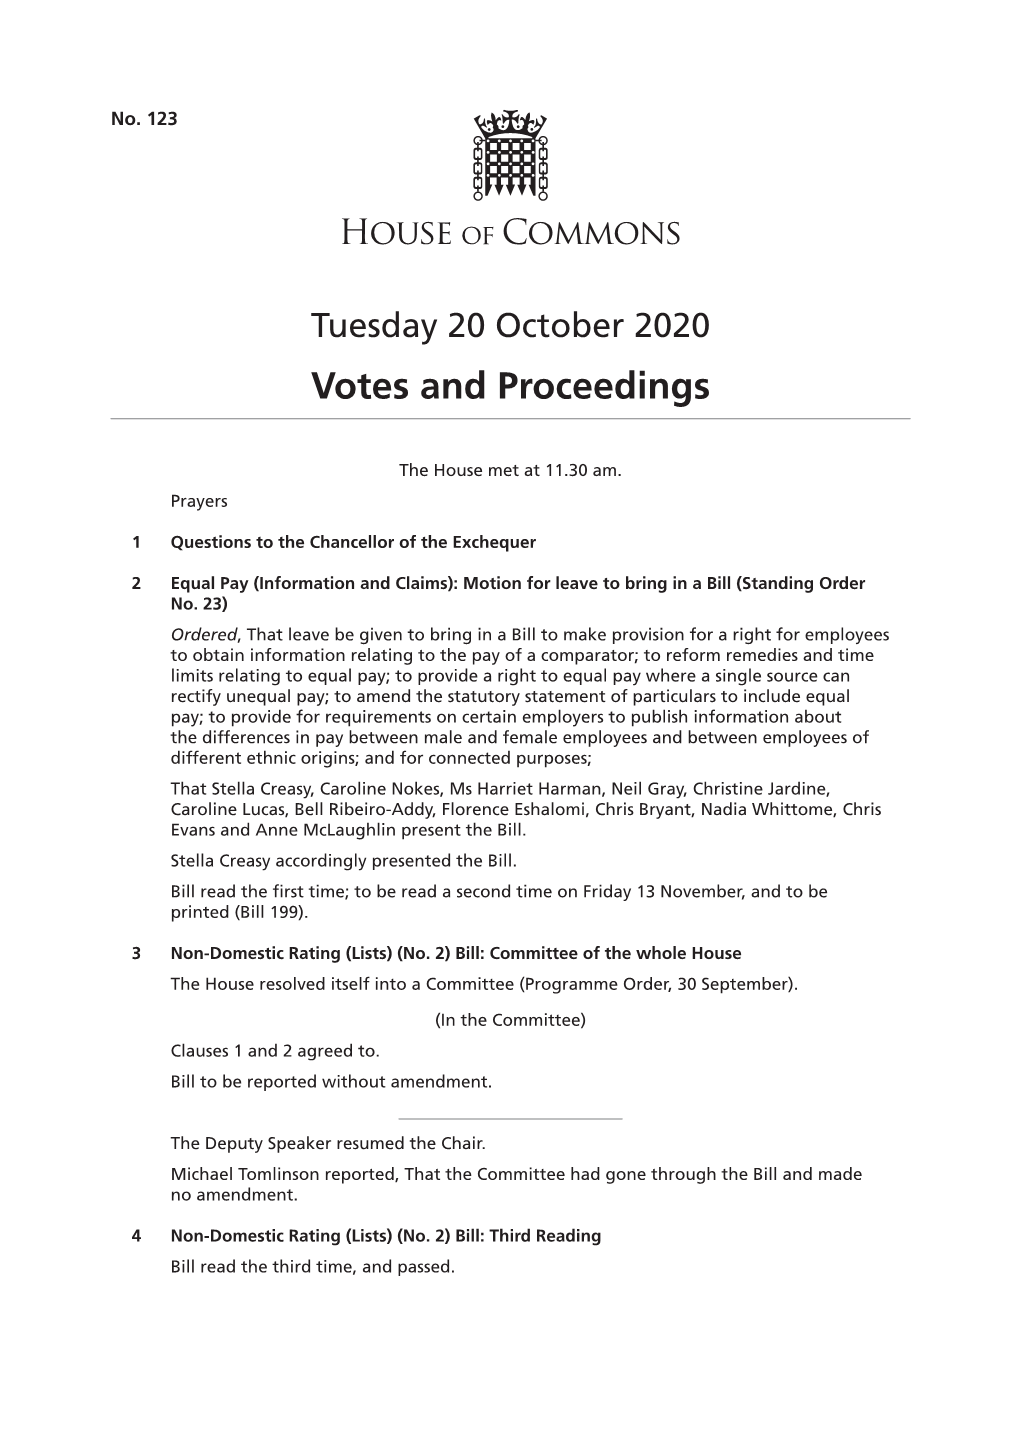 View Votes and Proceedings PDF File 0.03 MB